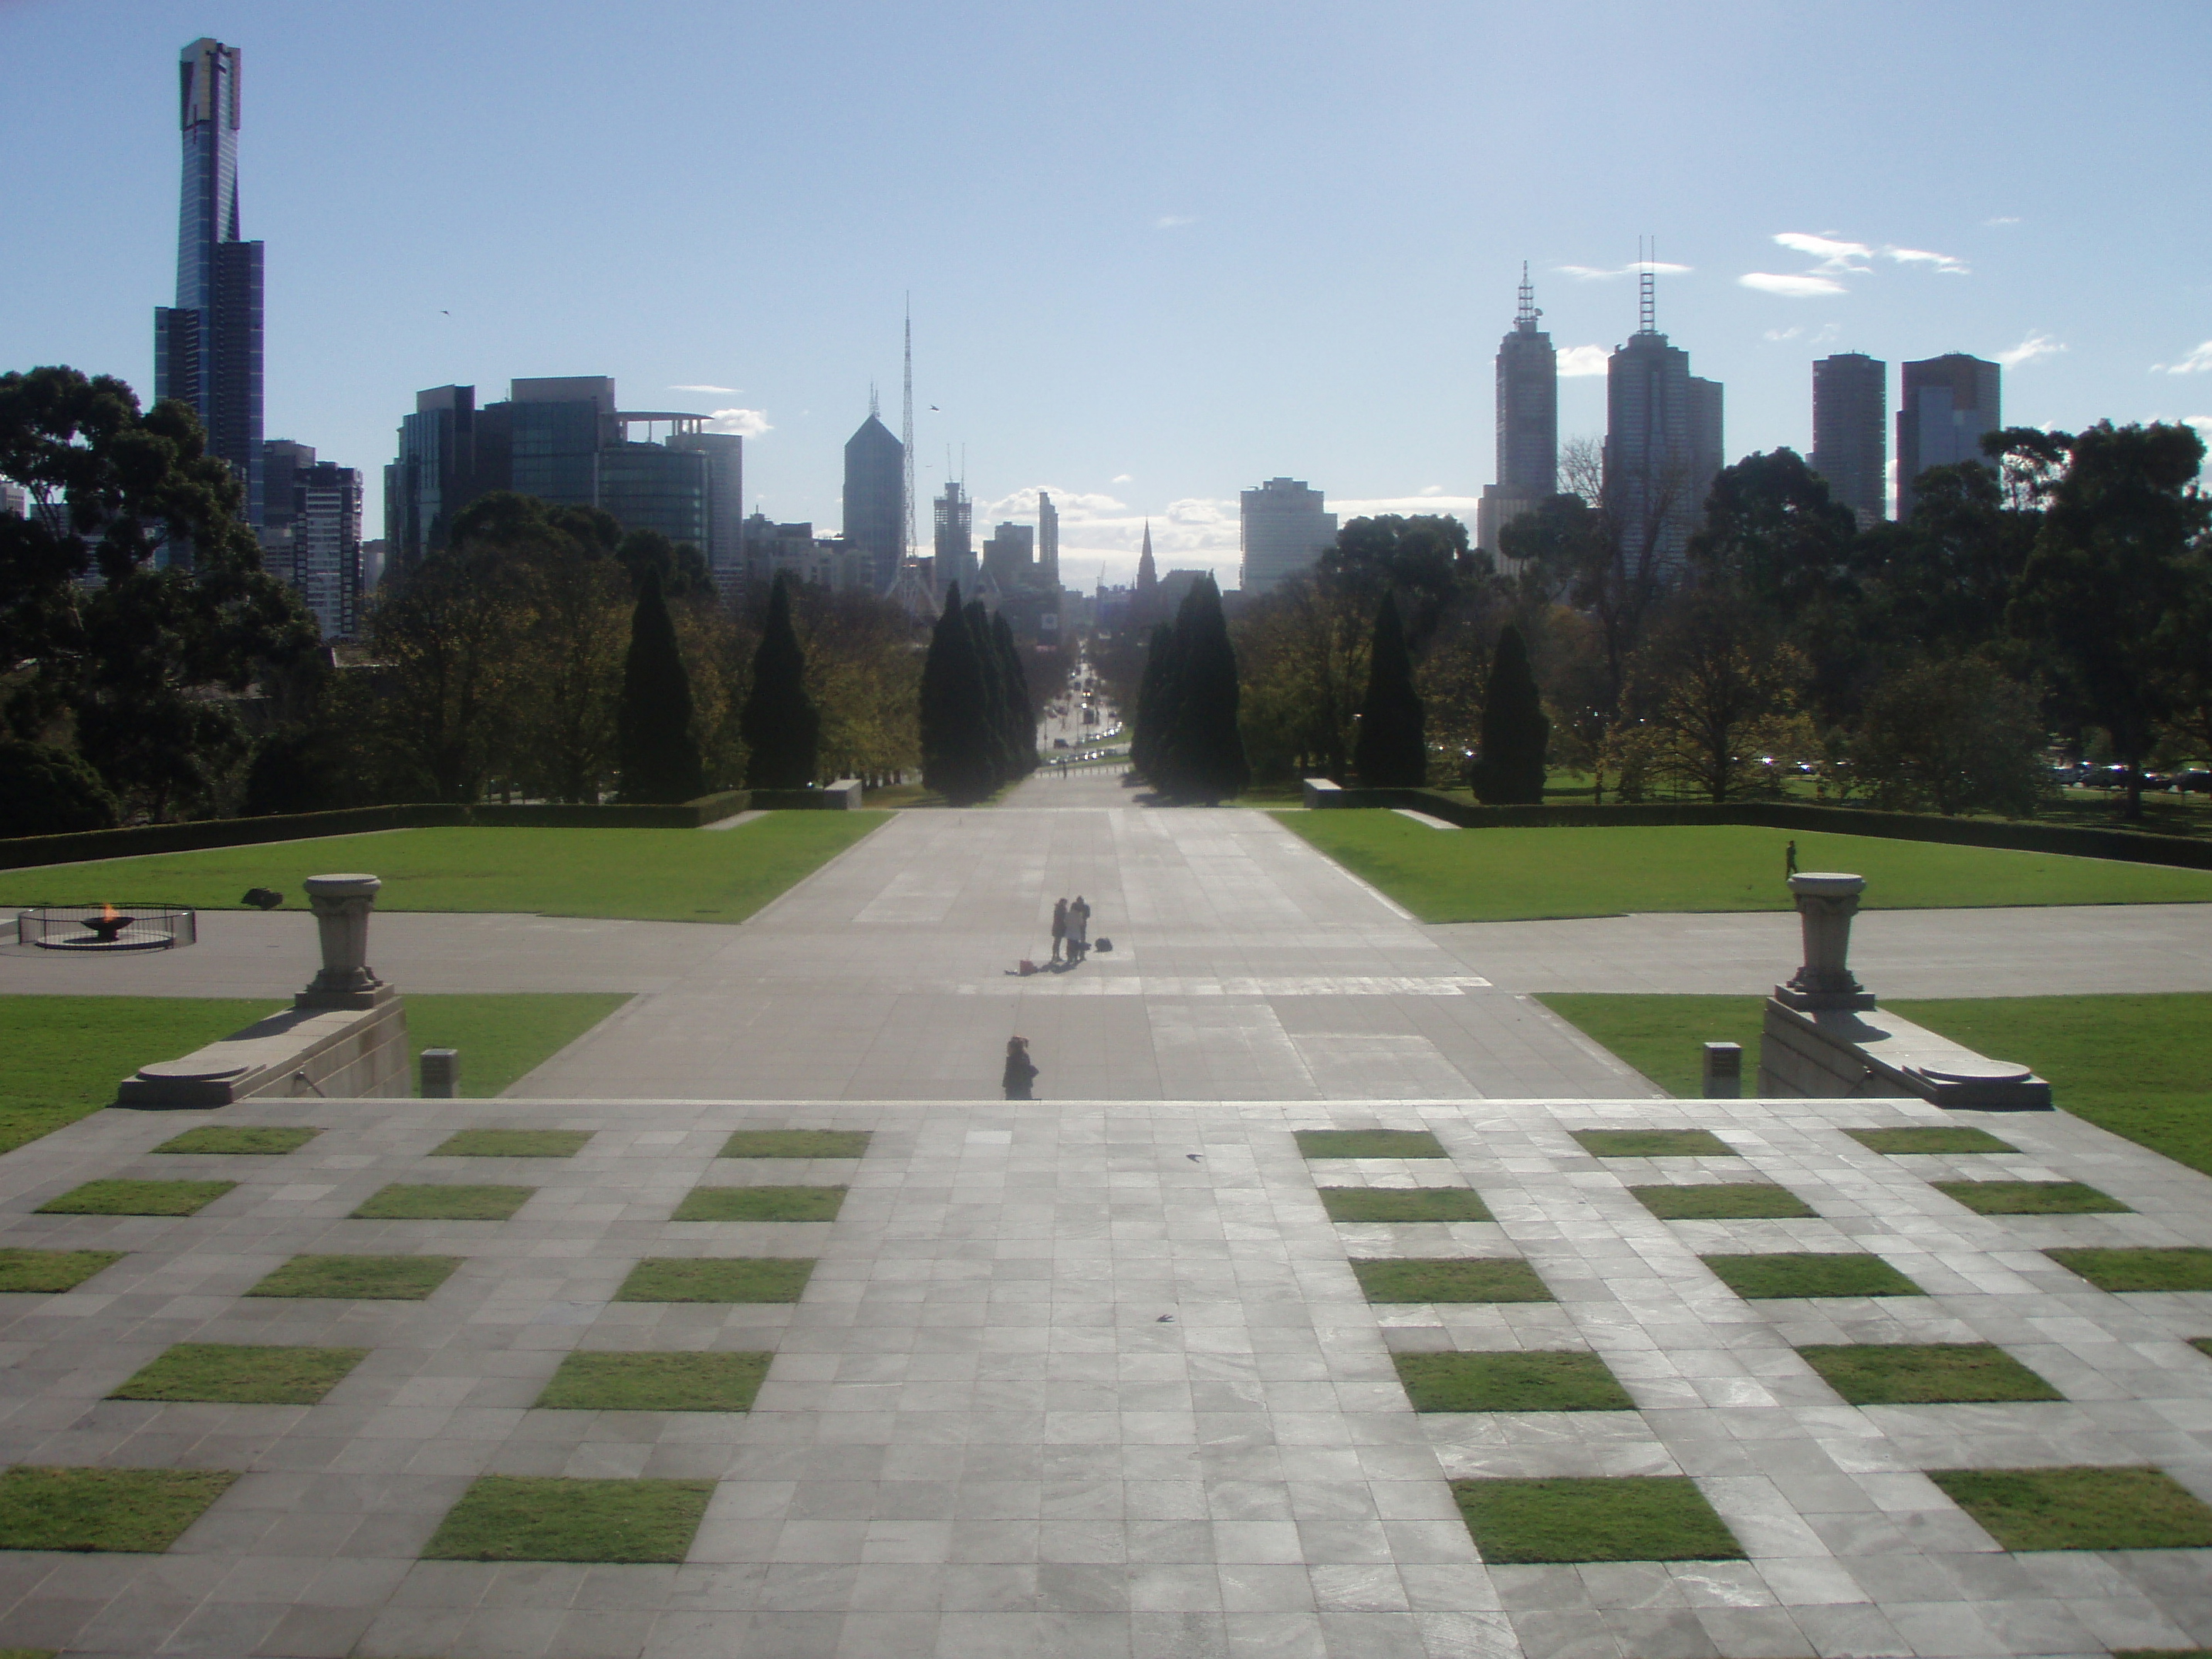 The Shrine of Remembrance Forecourt